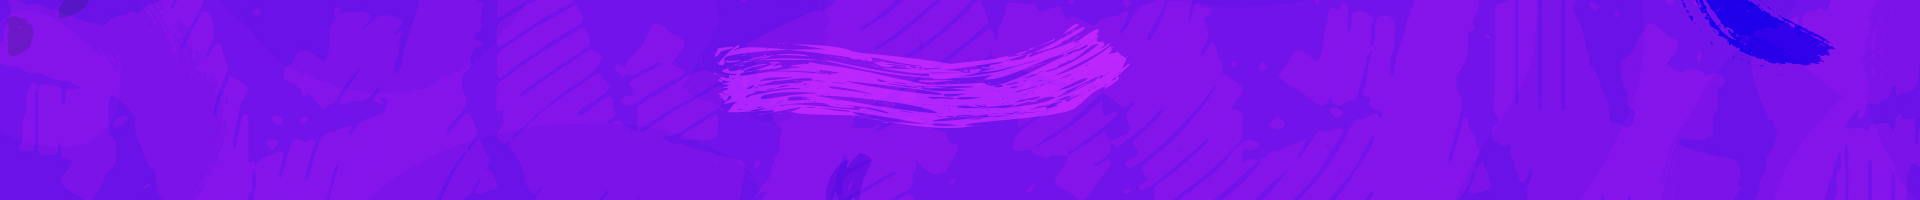 Purple abstract divider image